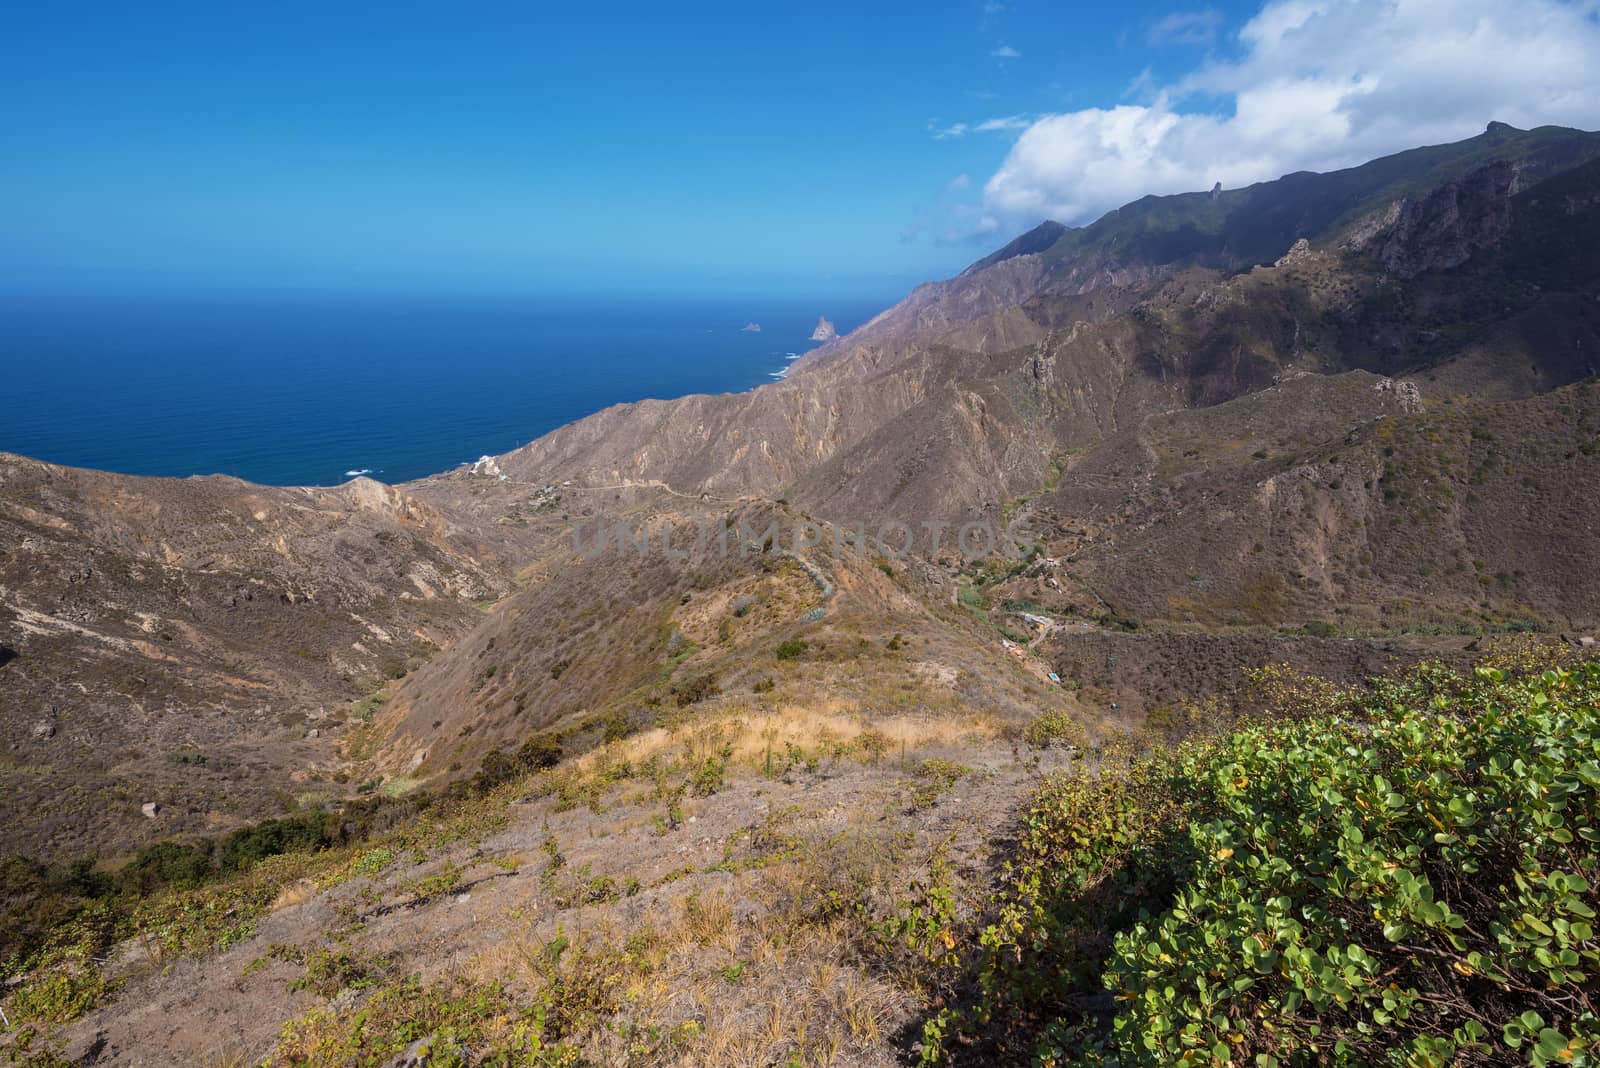 Anaga mountains, volcanic landscape in Tenerife, Canary island, Spain.